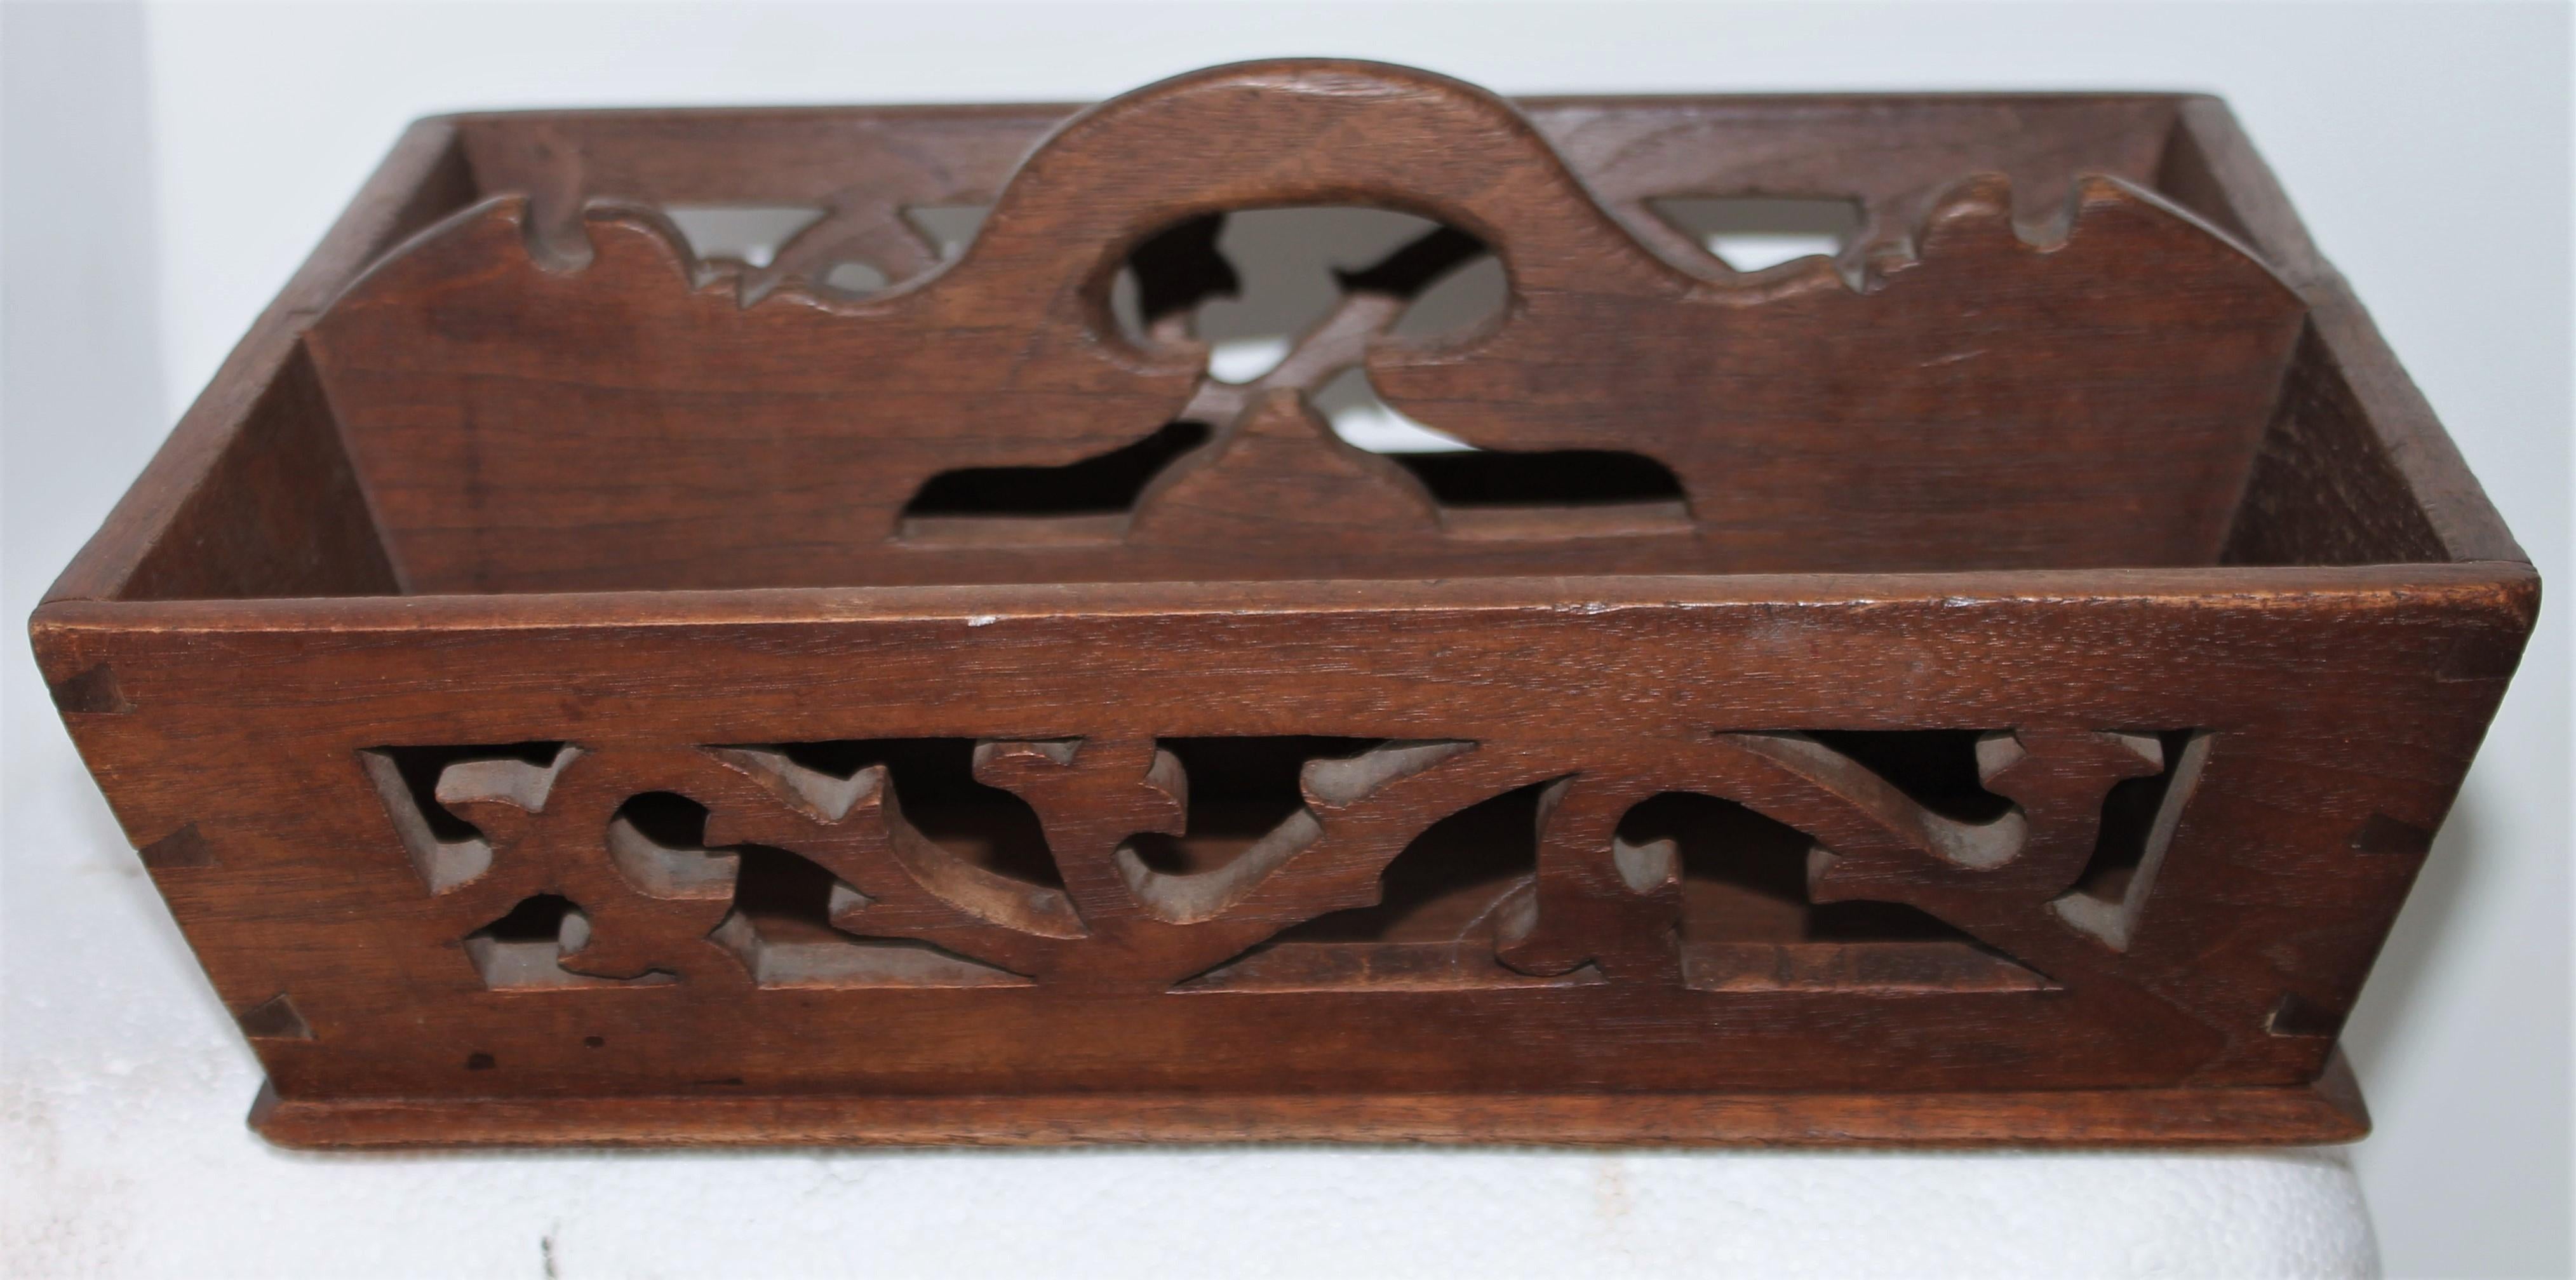 This fine walnut cutlery carrier has great cut outs and in very good condition. This New England carrier is very well made and fine details.